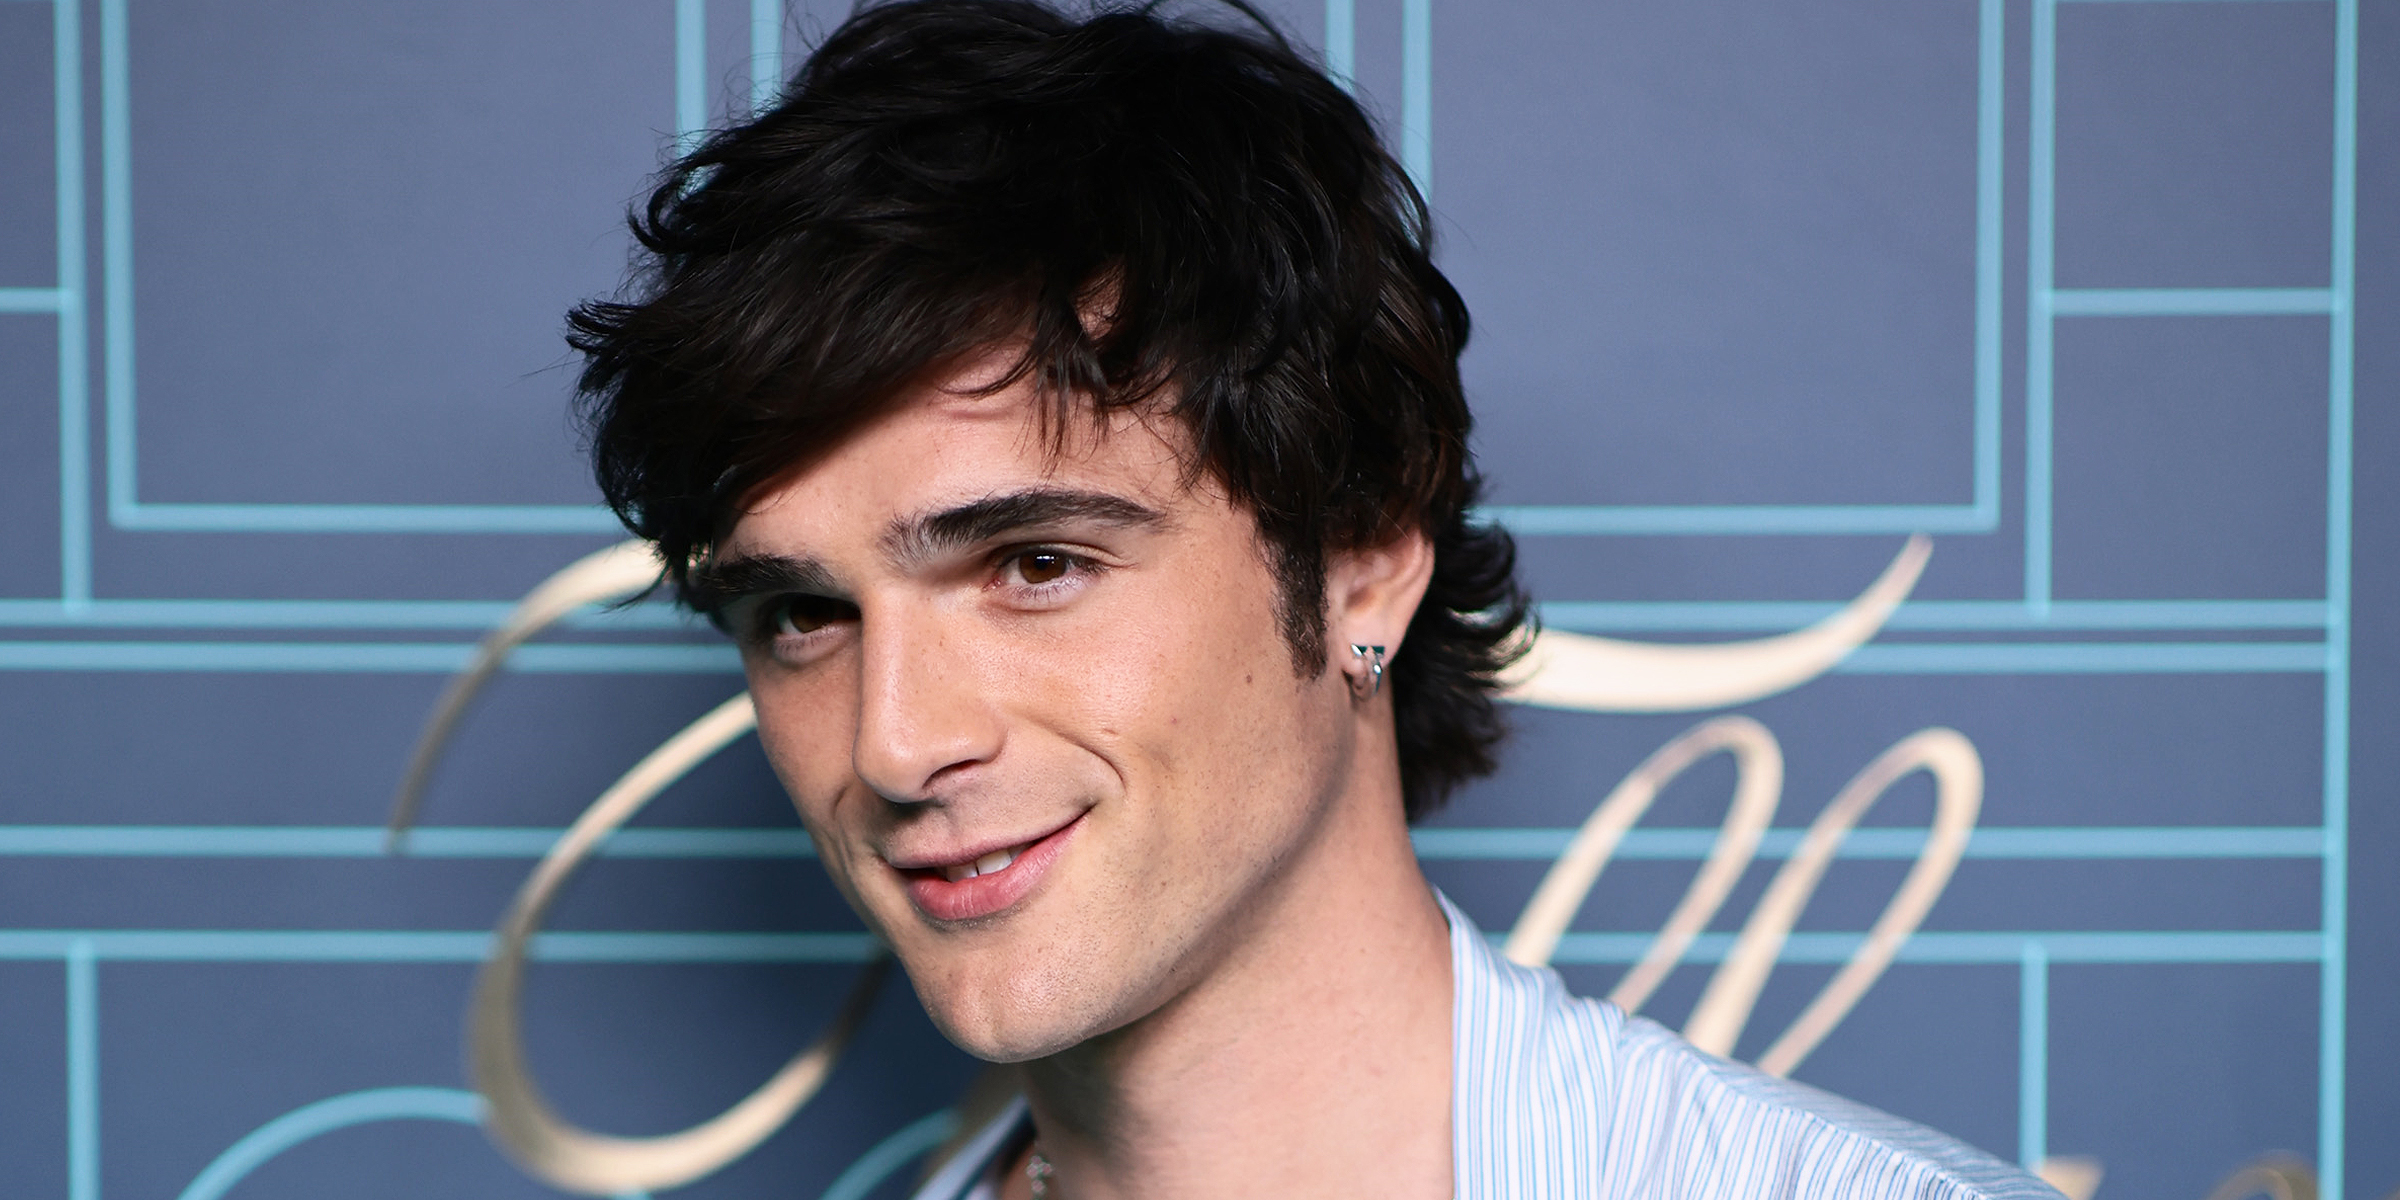 Jacob Elordi's Siblings Stay Private While Parents Show Continuous Support